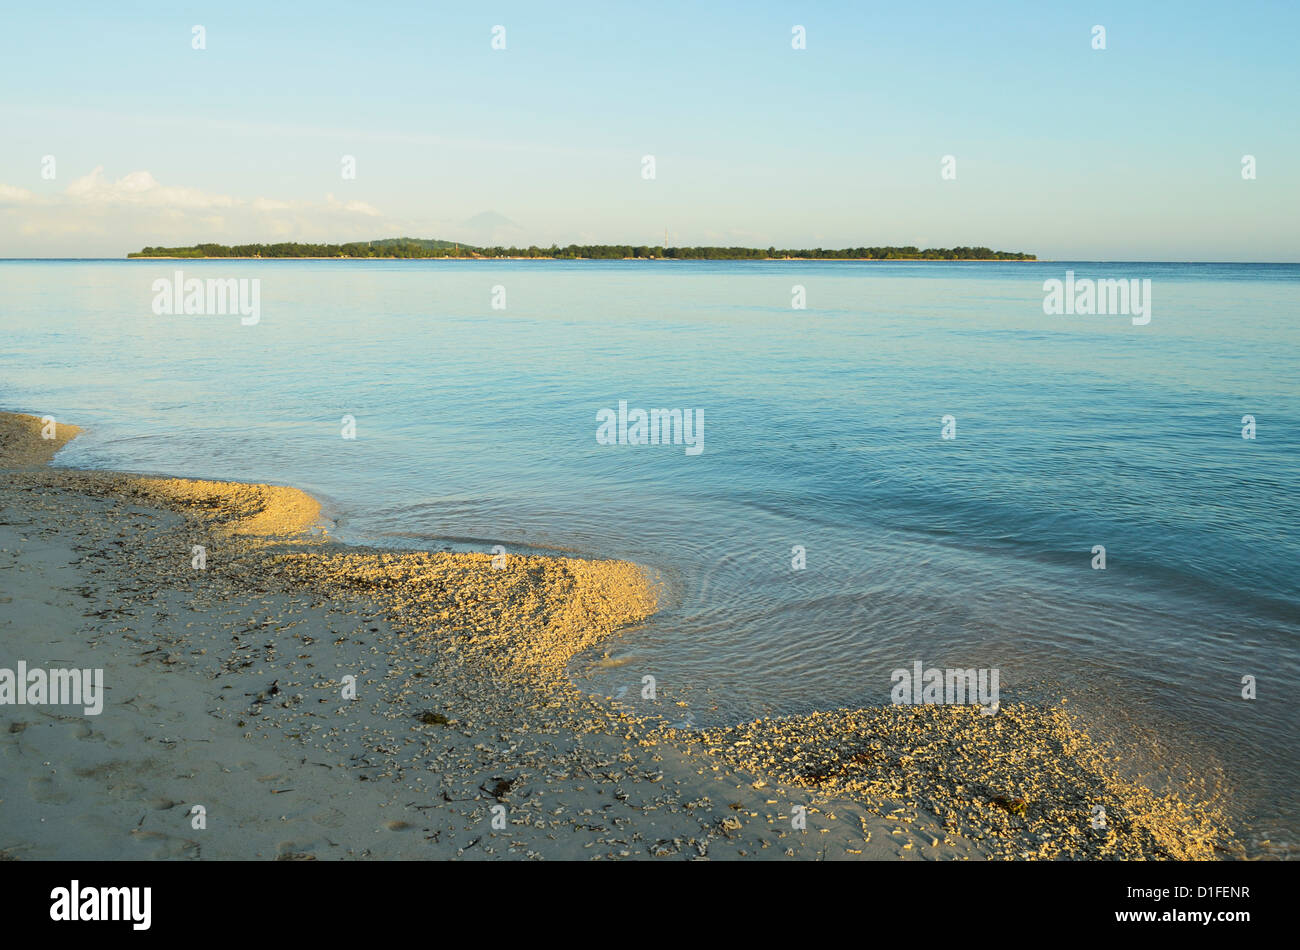 View of Gili Meno from Gili Air, Lombok, Indonesia, Southeast Asia, Asia Stock Photo